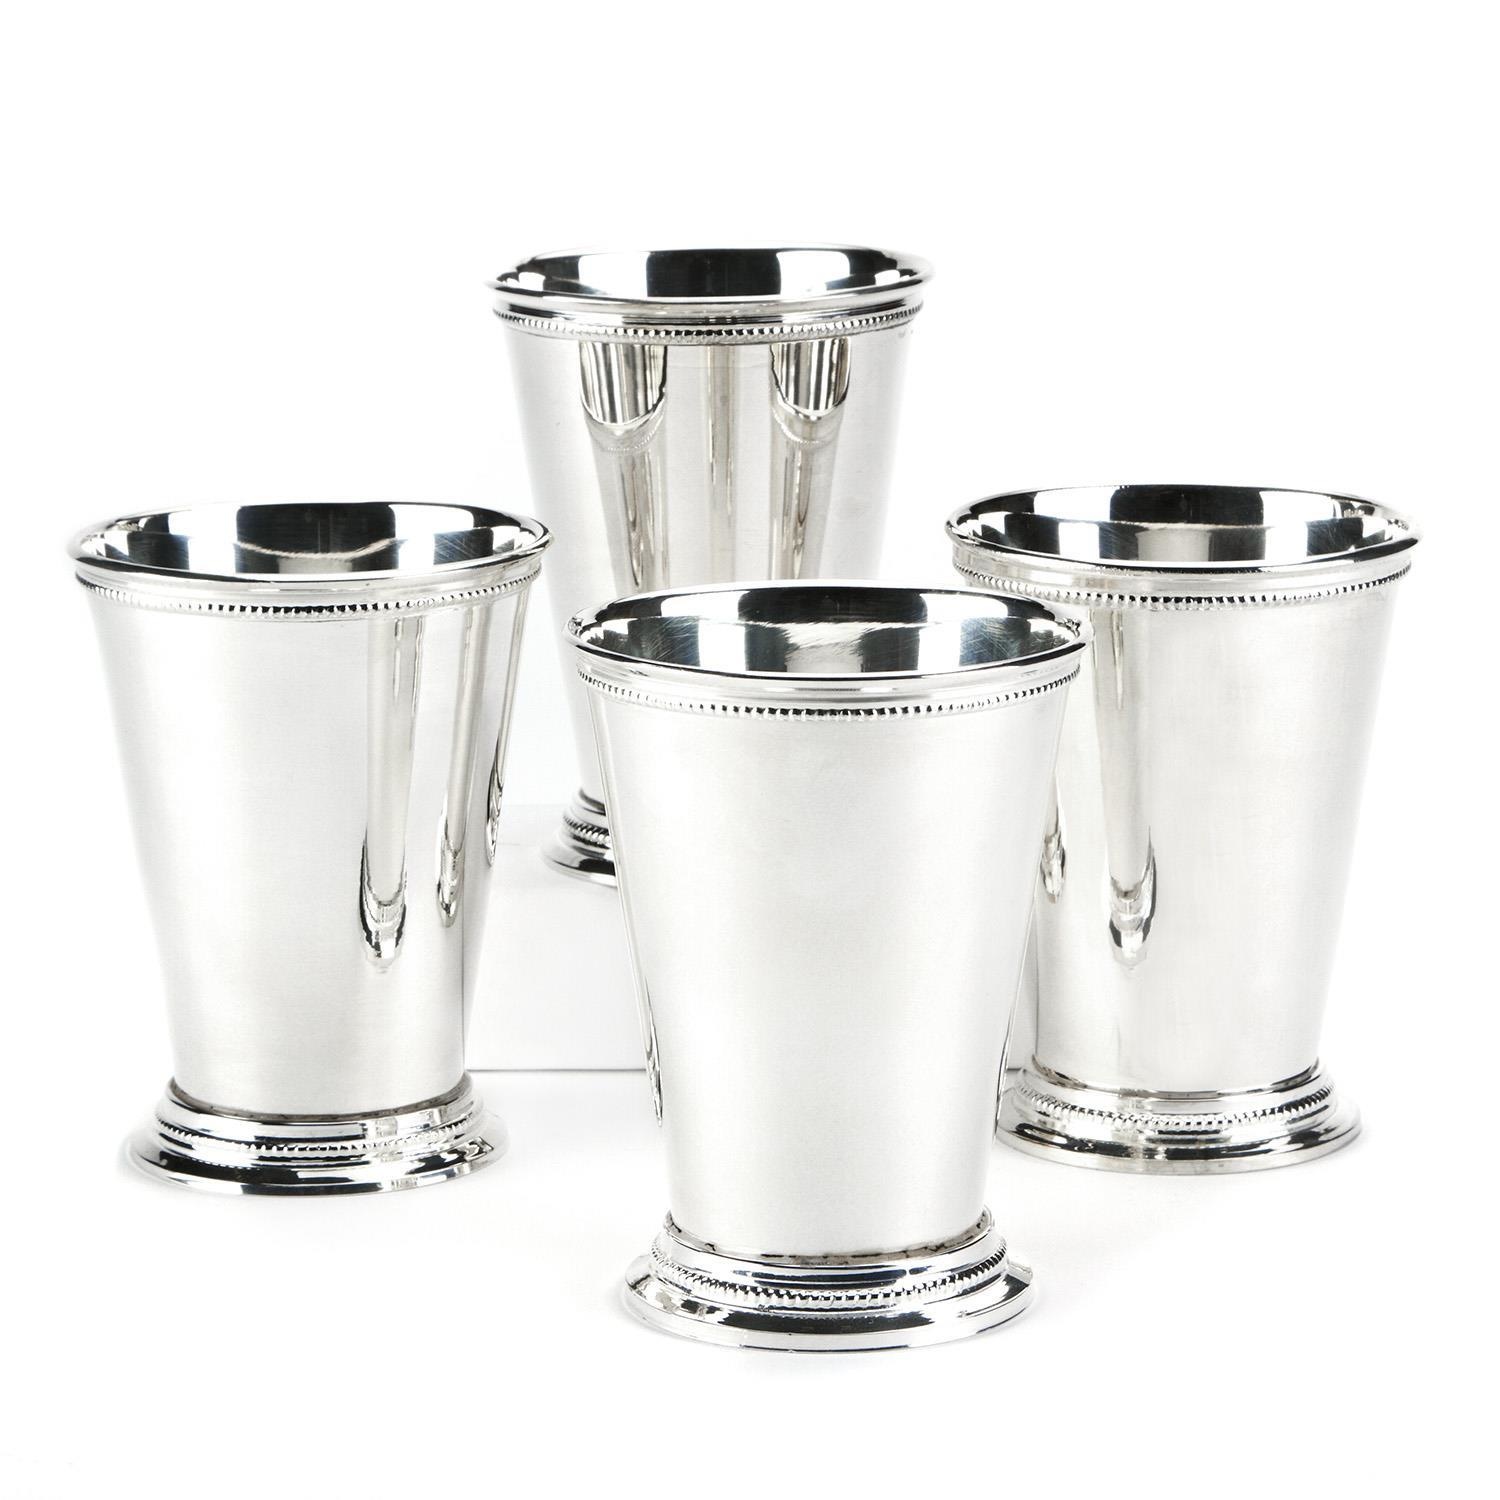 Two's Company Set/ 4 Mint Julep Cups in Gift Box